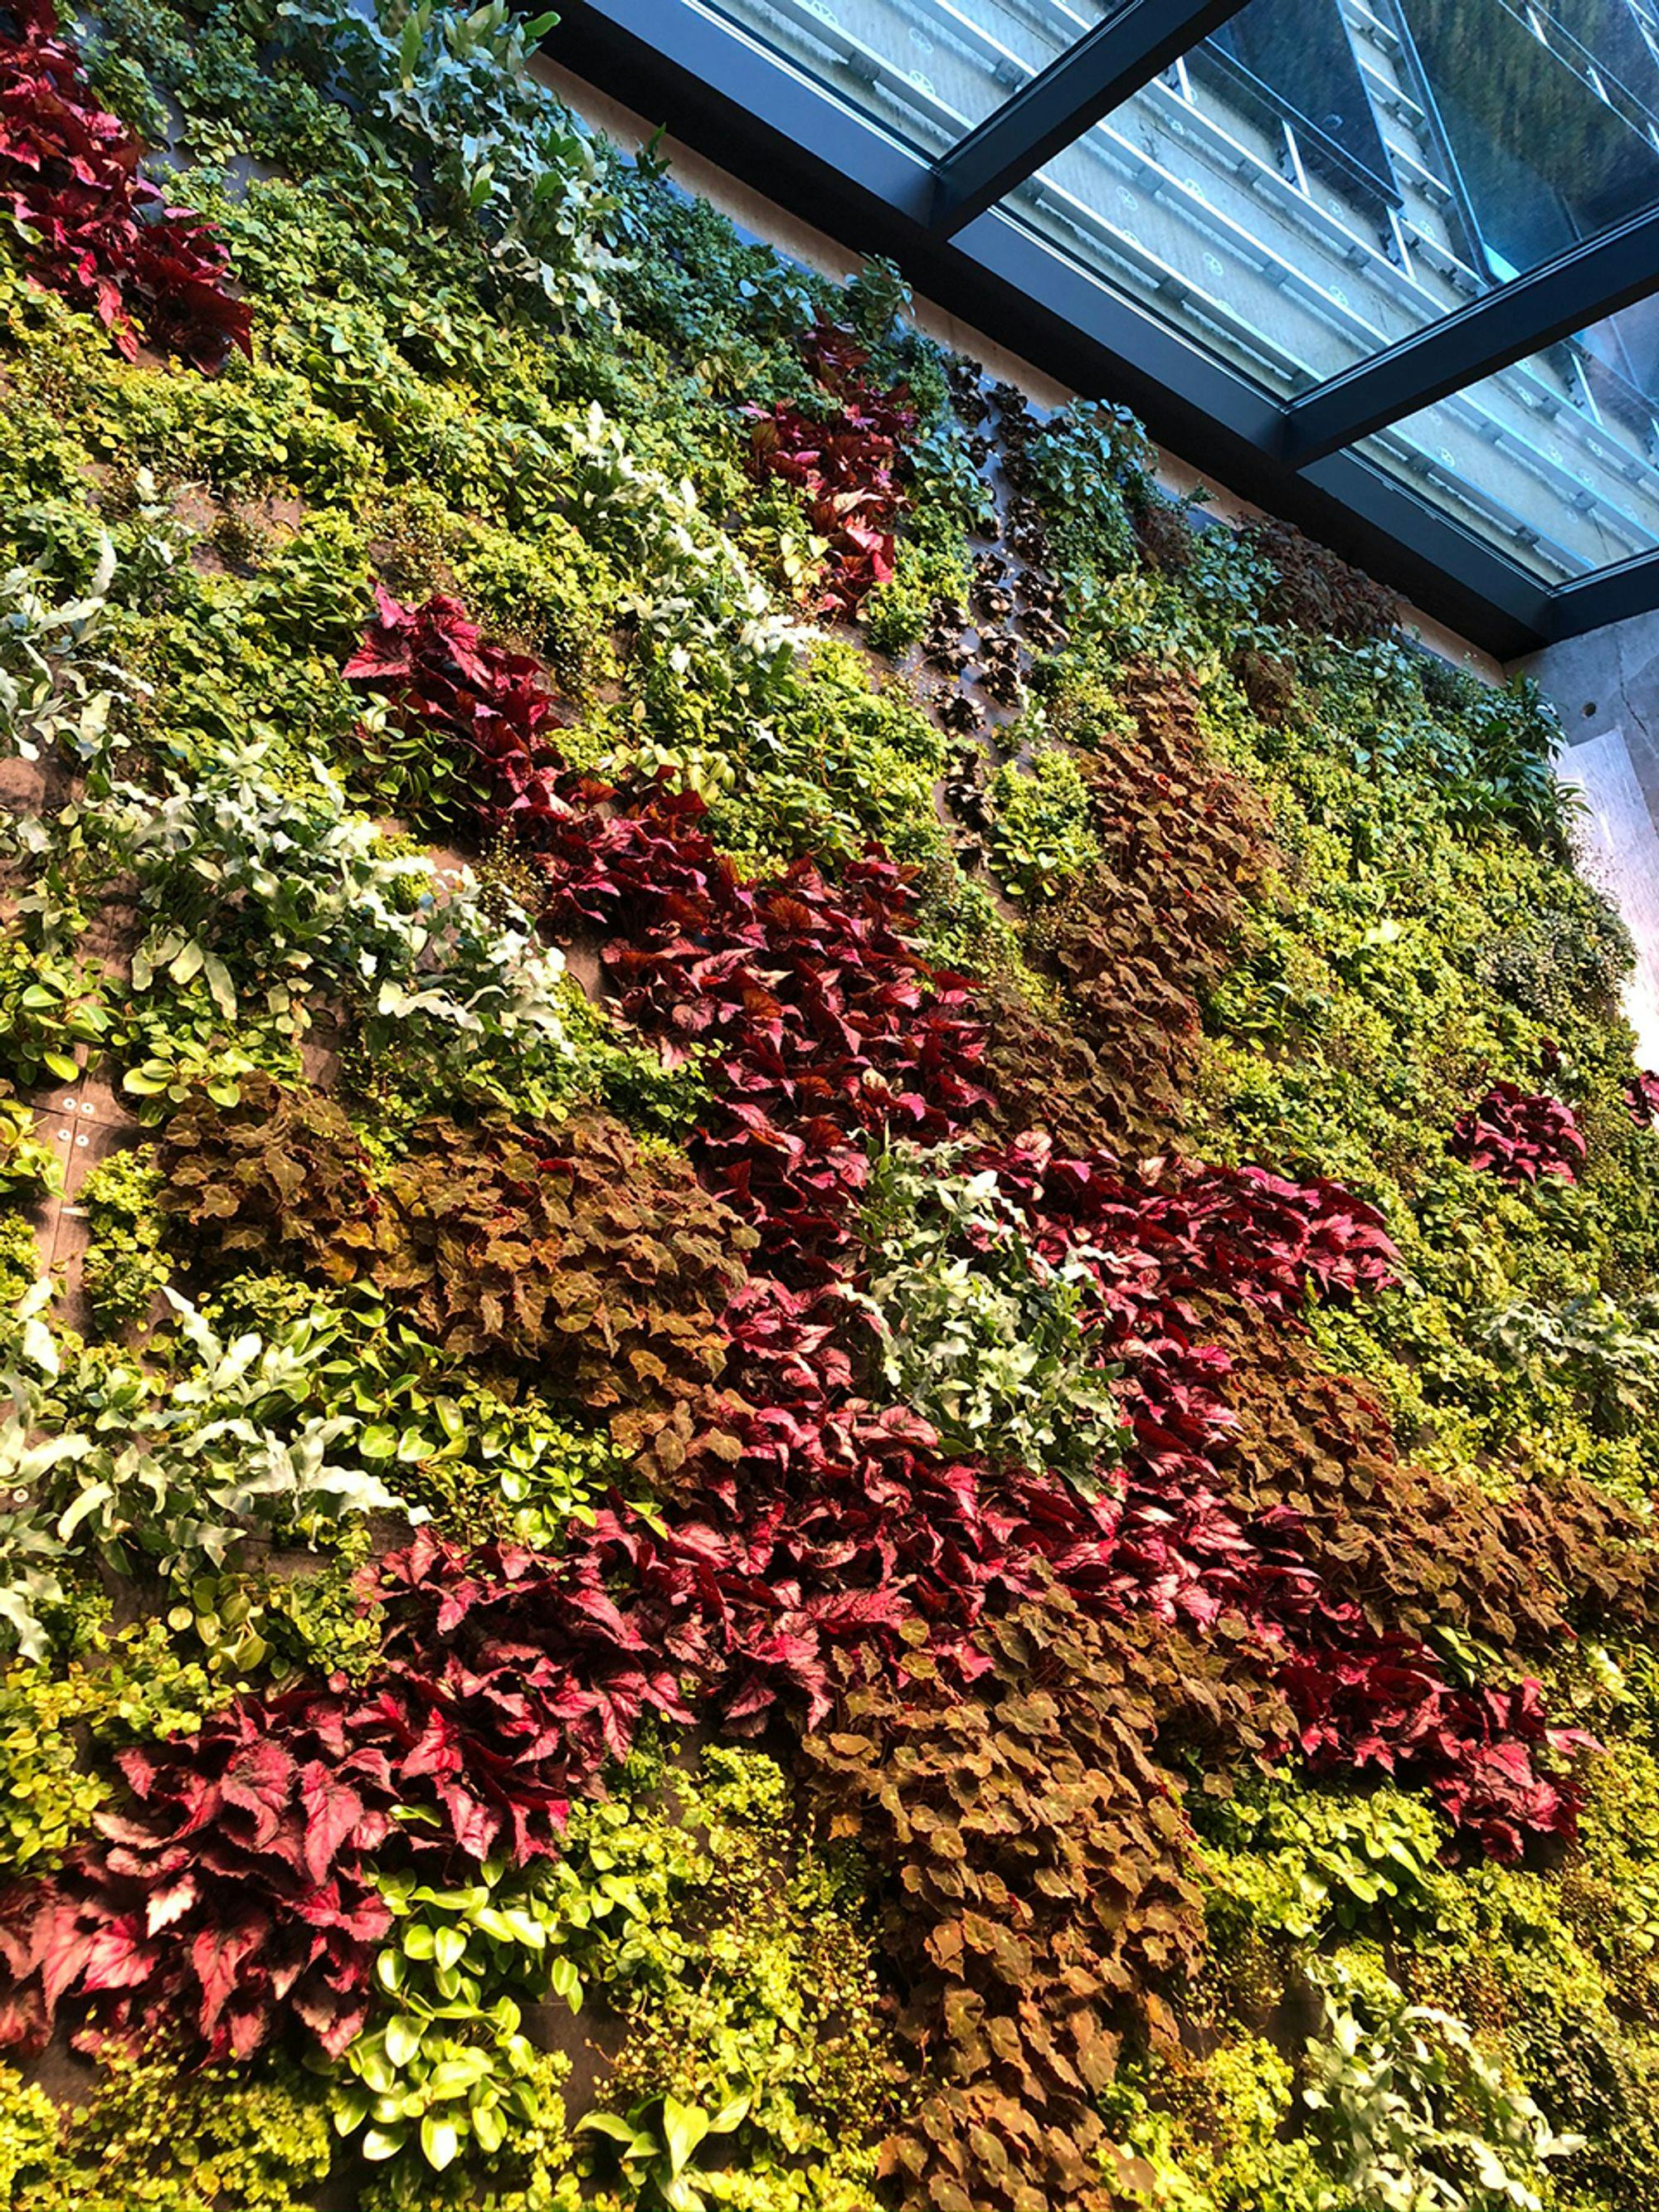 A wall of green and purple leaves